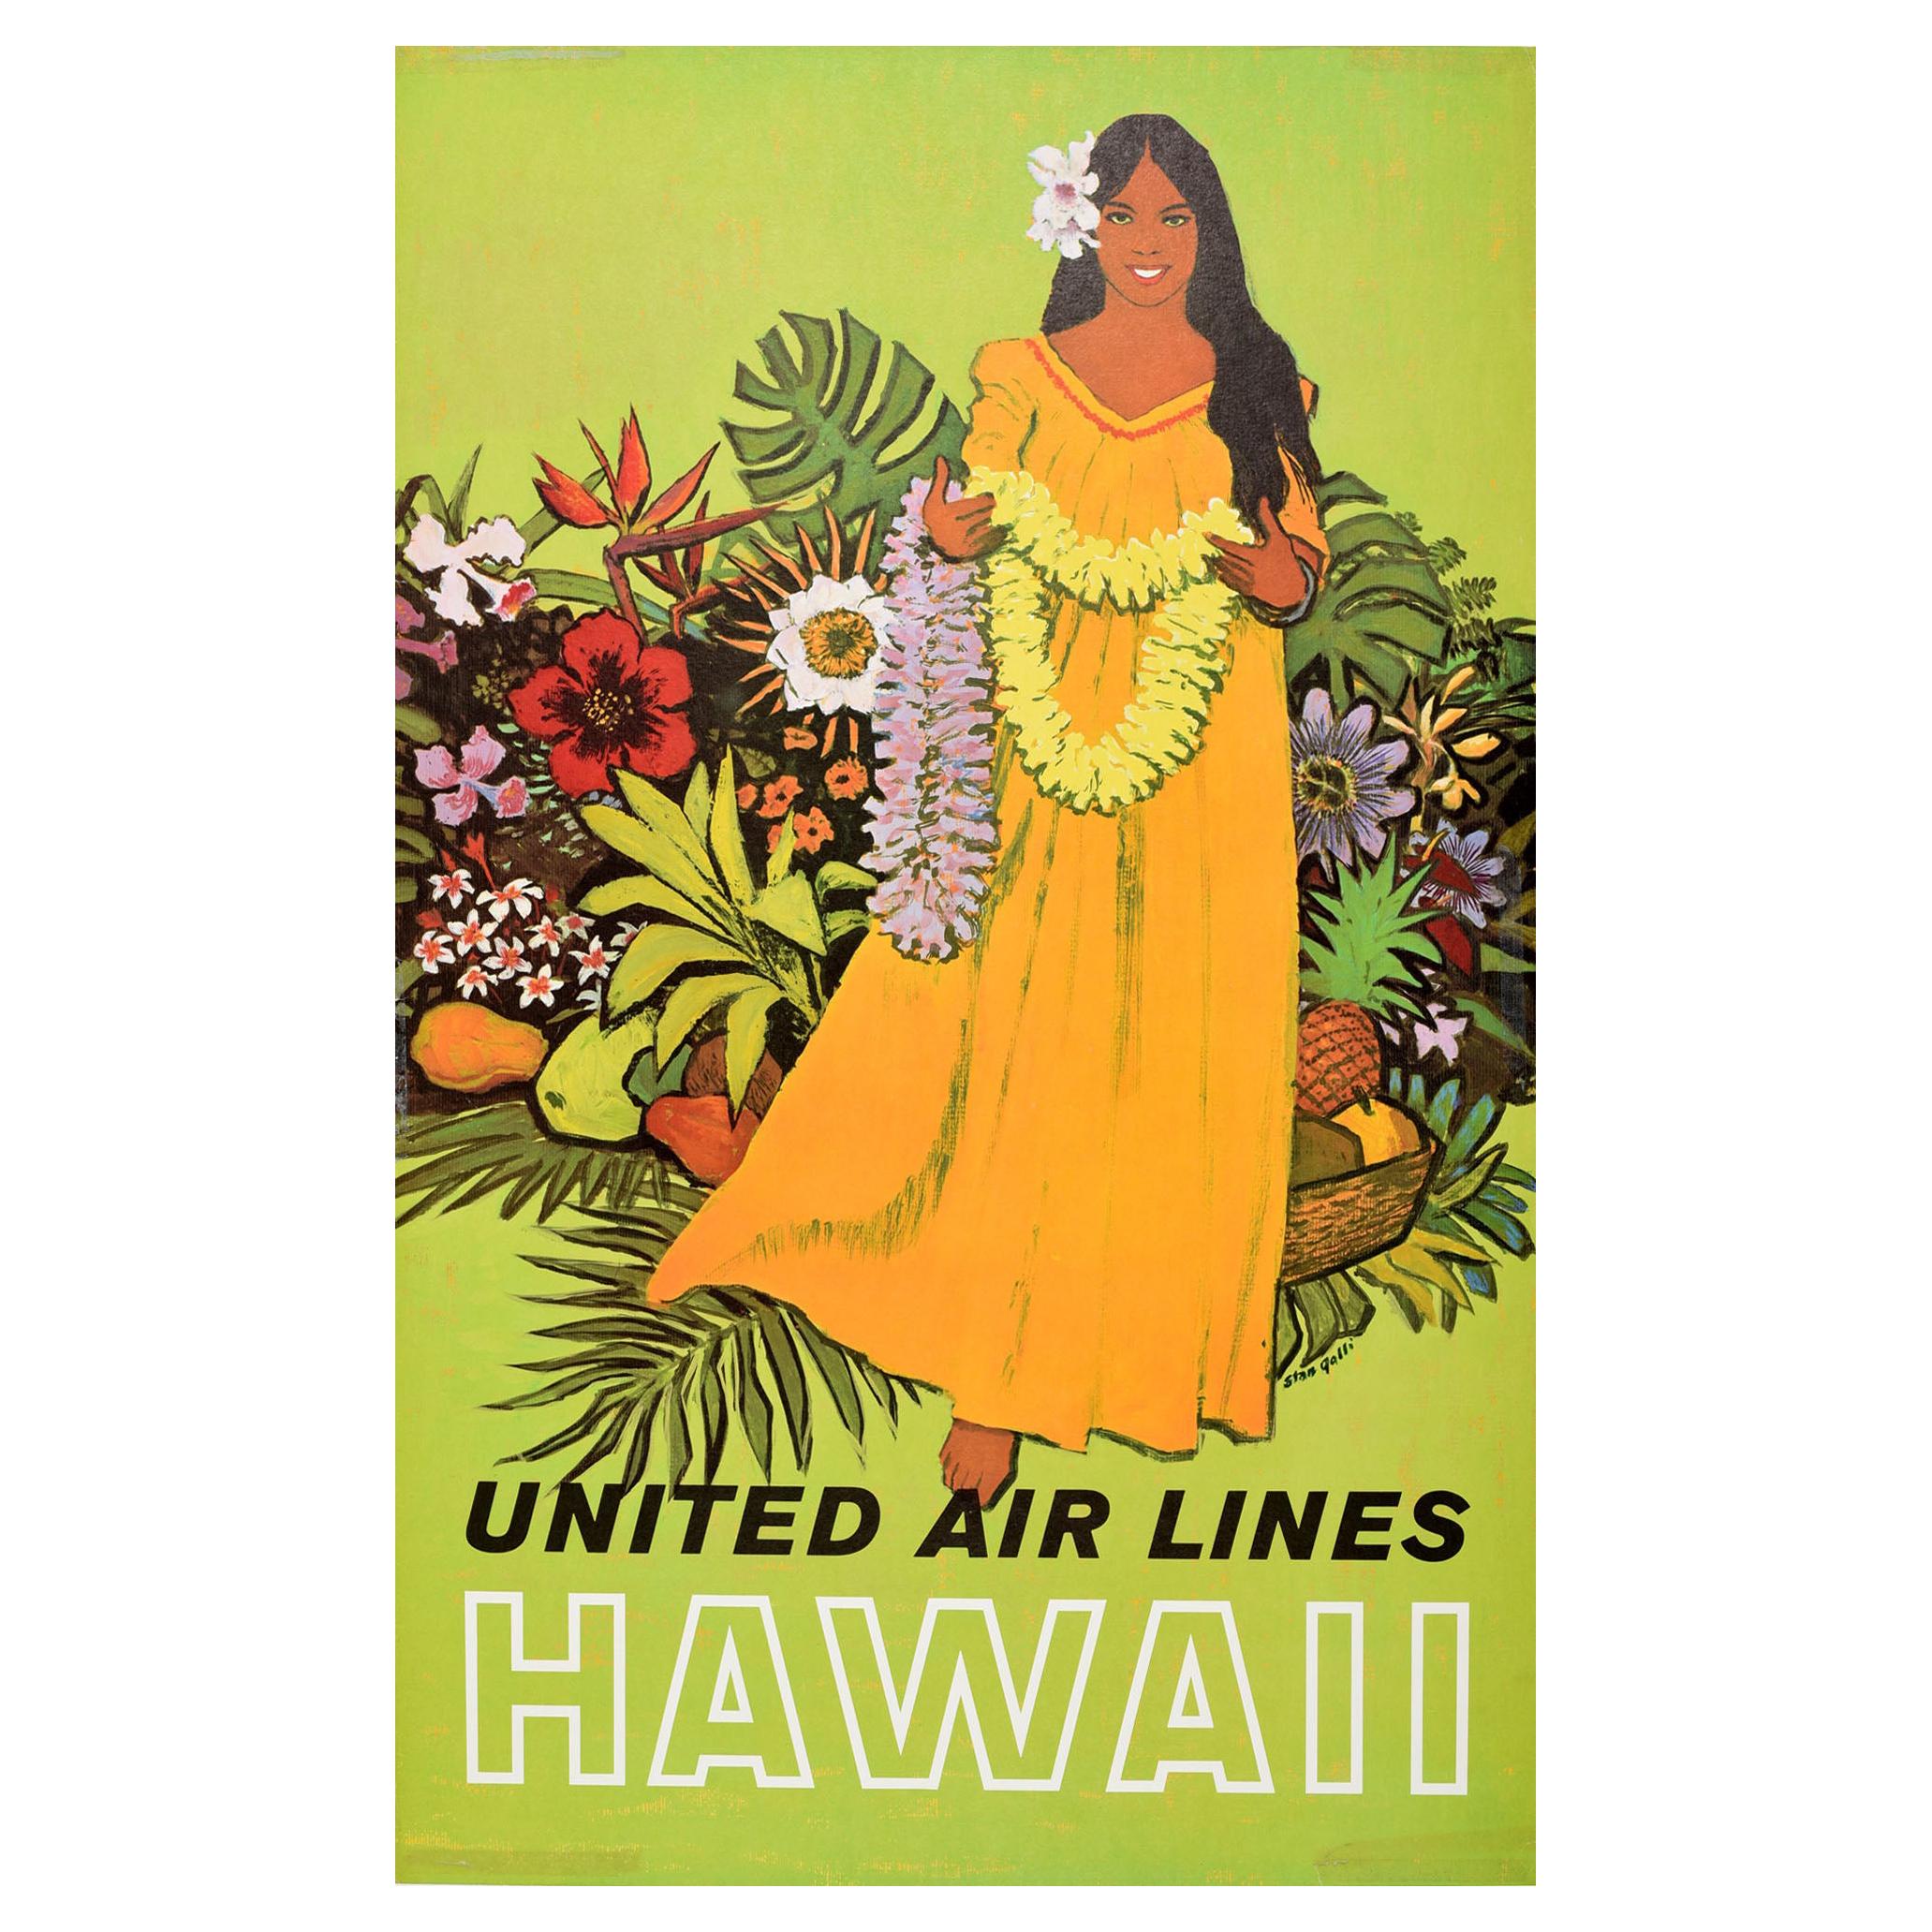 United Airlines to Hawaii travel poster 